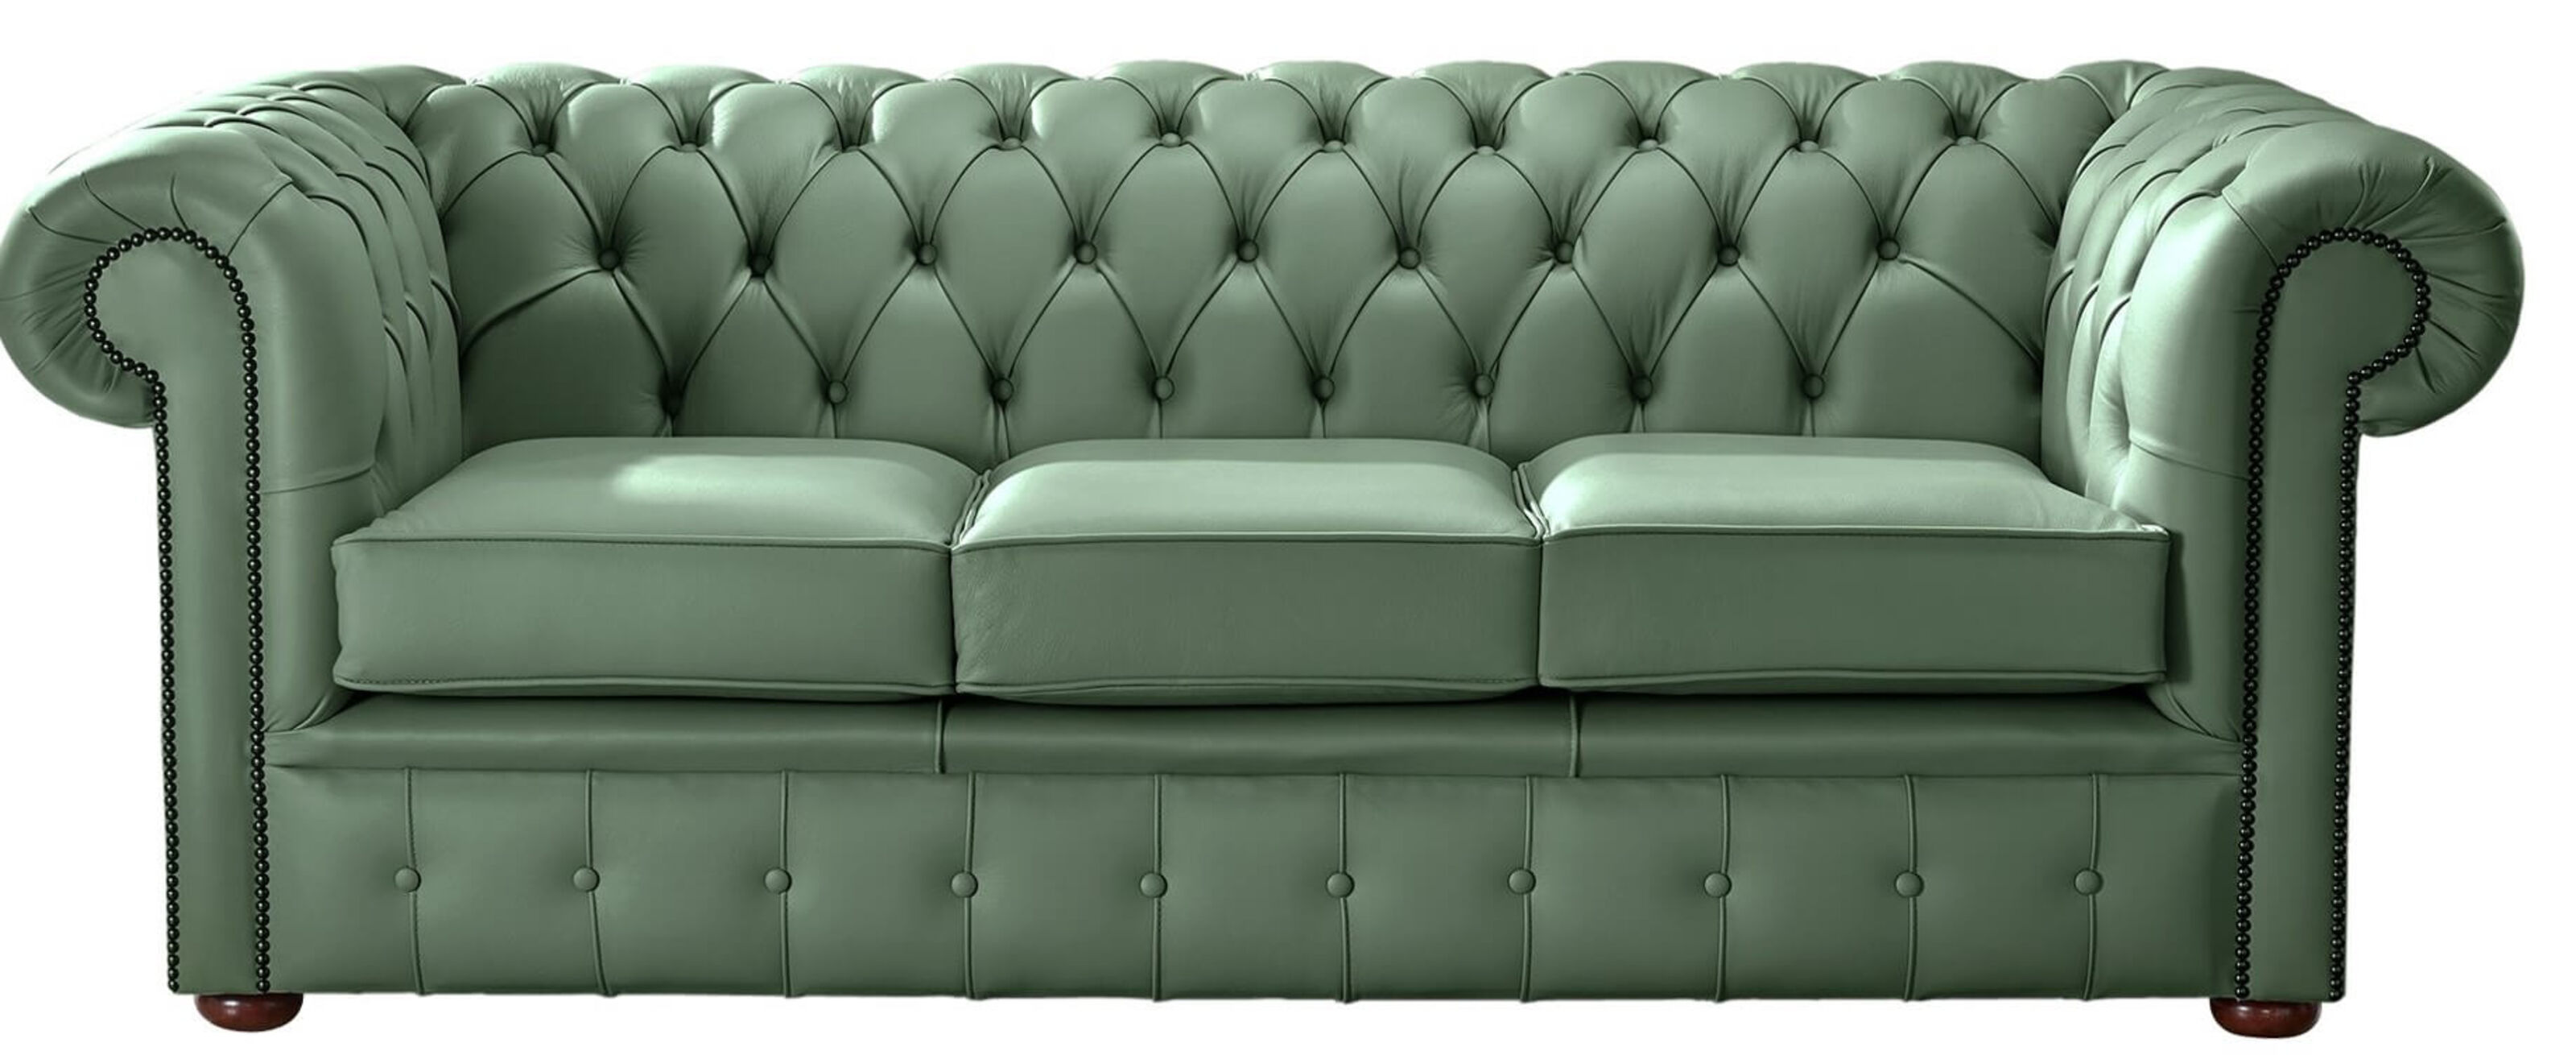 Stylish Seating in Bolton Explore Chesterfield Sofas  %Post Title